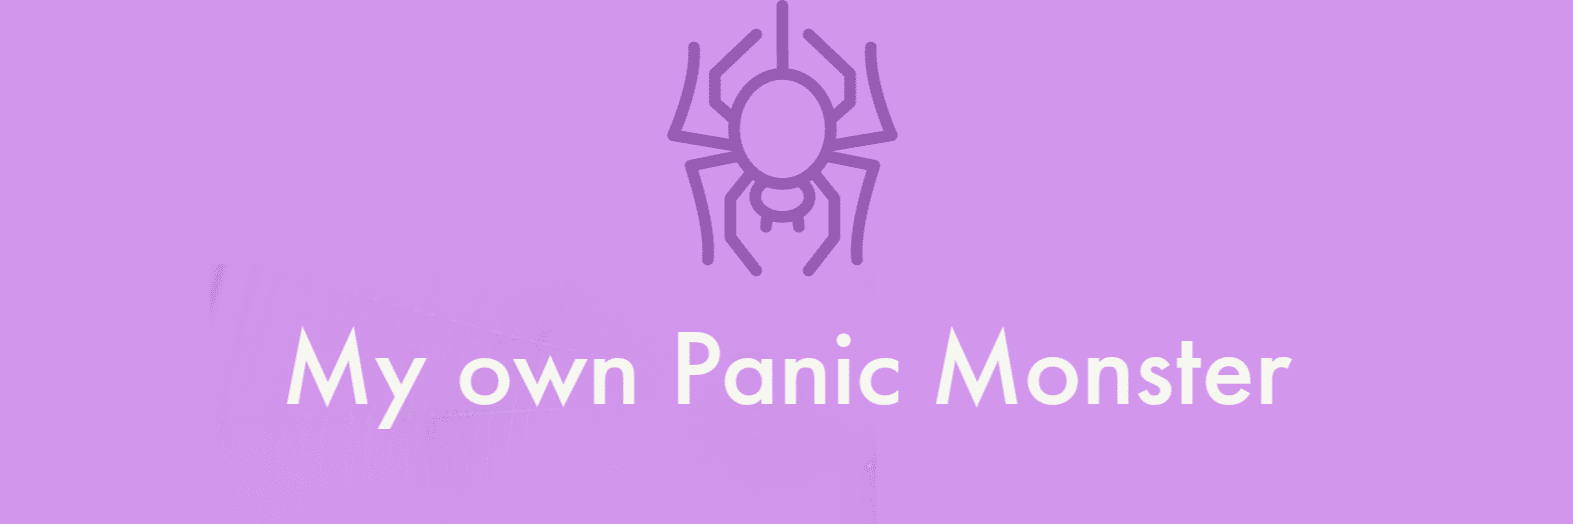 Panic monster is at work 1